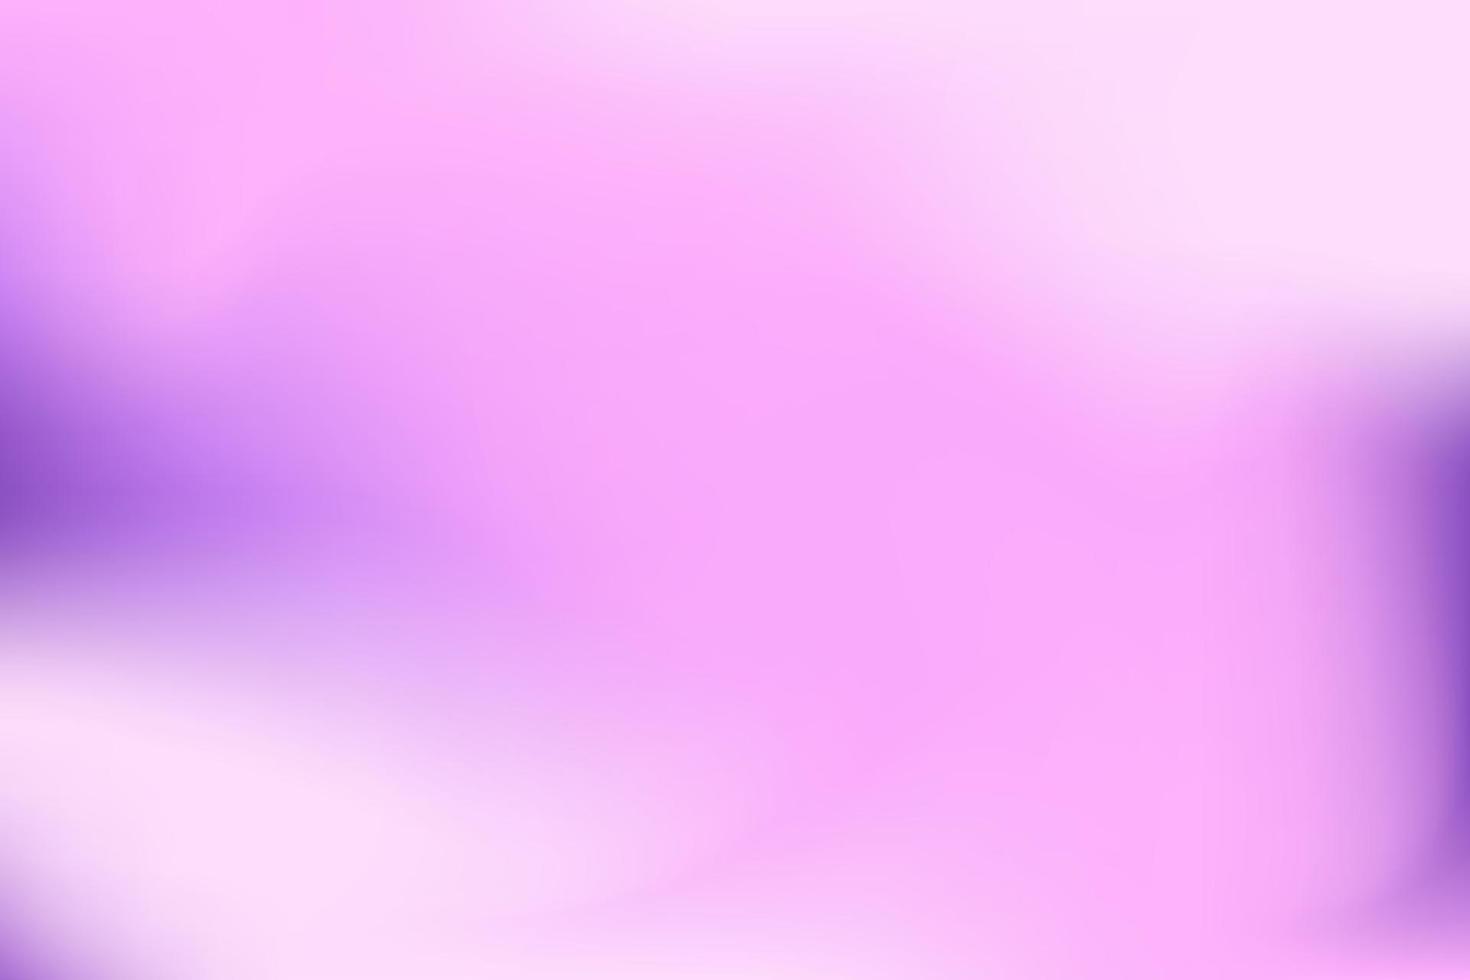 Beautiful simple vector pink gradient. Unobtrusive color background. Can be used for web background, banner, postcard, collage.